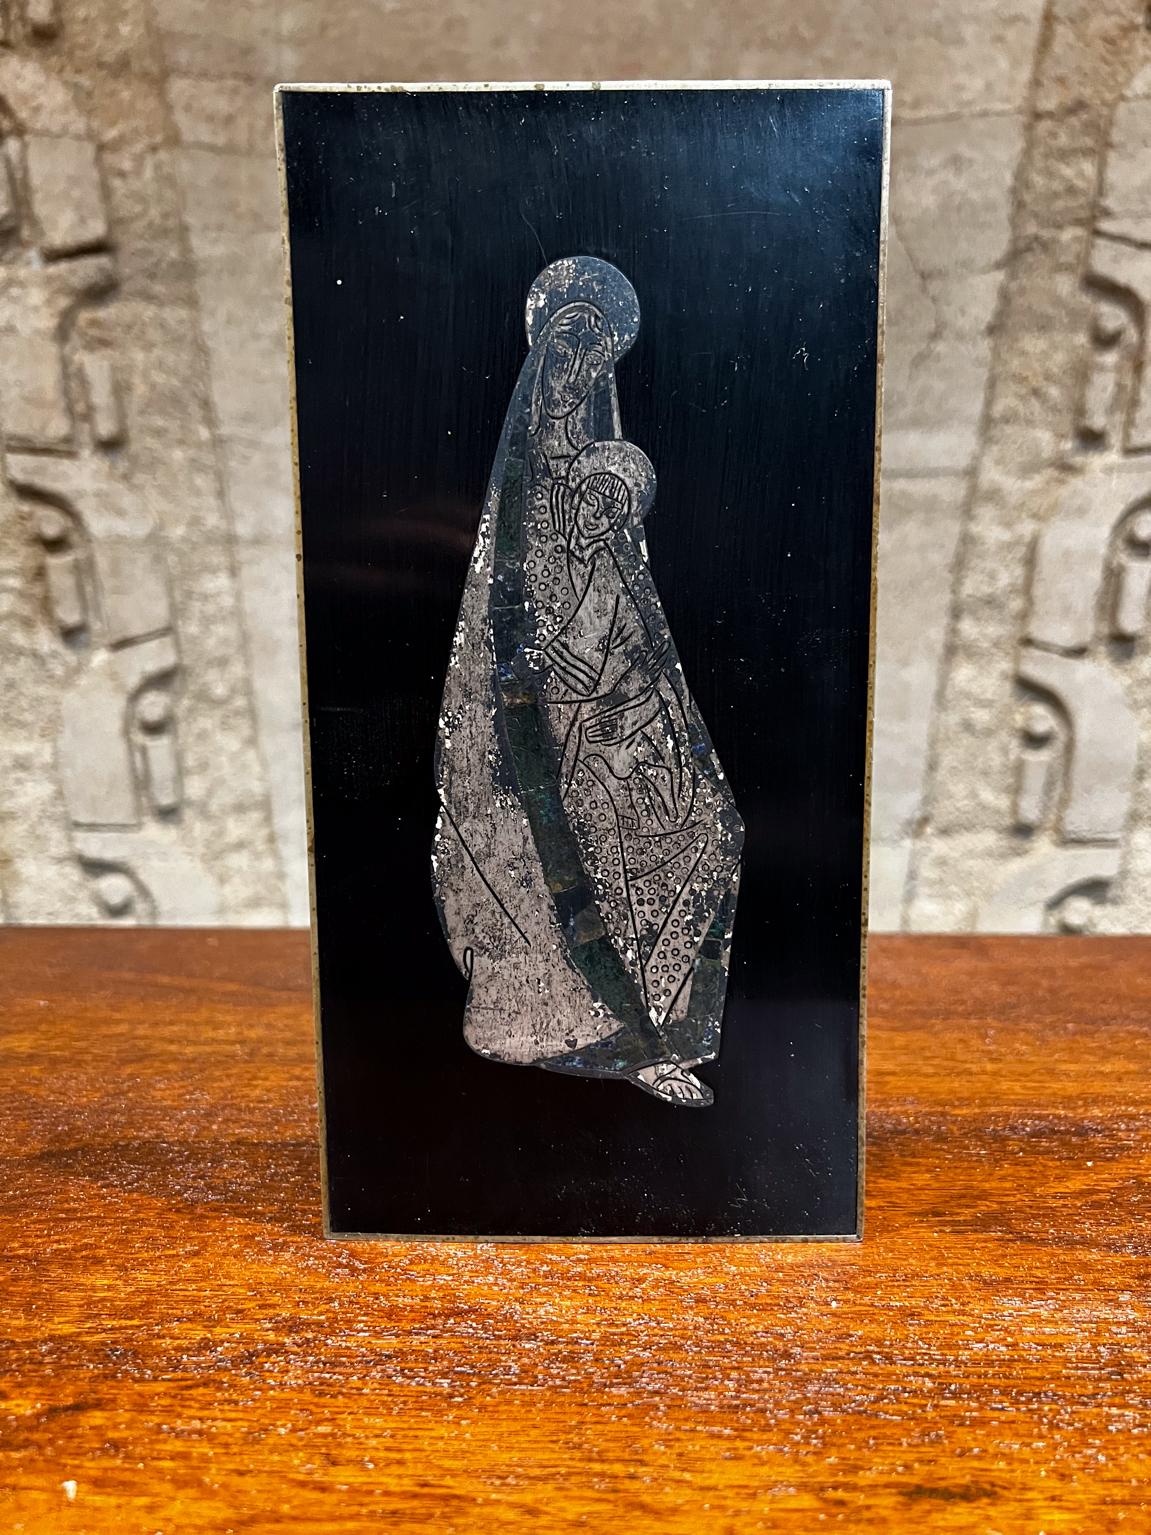 1970s Los Castillo Virgin Mary Silver Black Wall Art Taxco Mexico
Silver on Black Lacquered Wood
10.25 H x 5 W x .75 Thick
Made in Mexico.
Maker stamped.
Original vintage unrestored preowned fair condition.
Please refer to images.